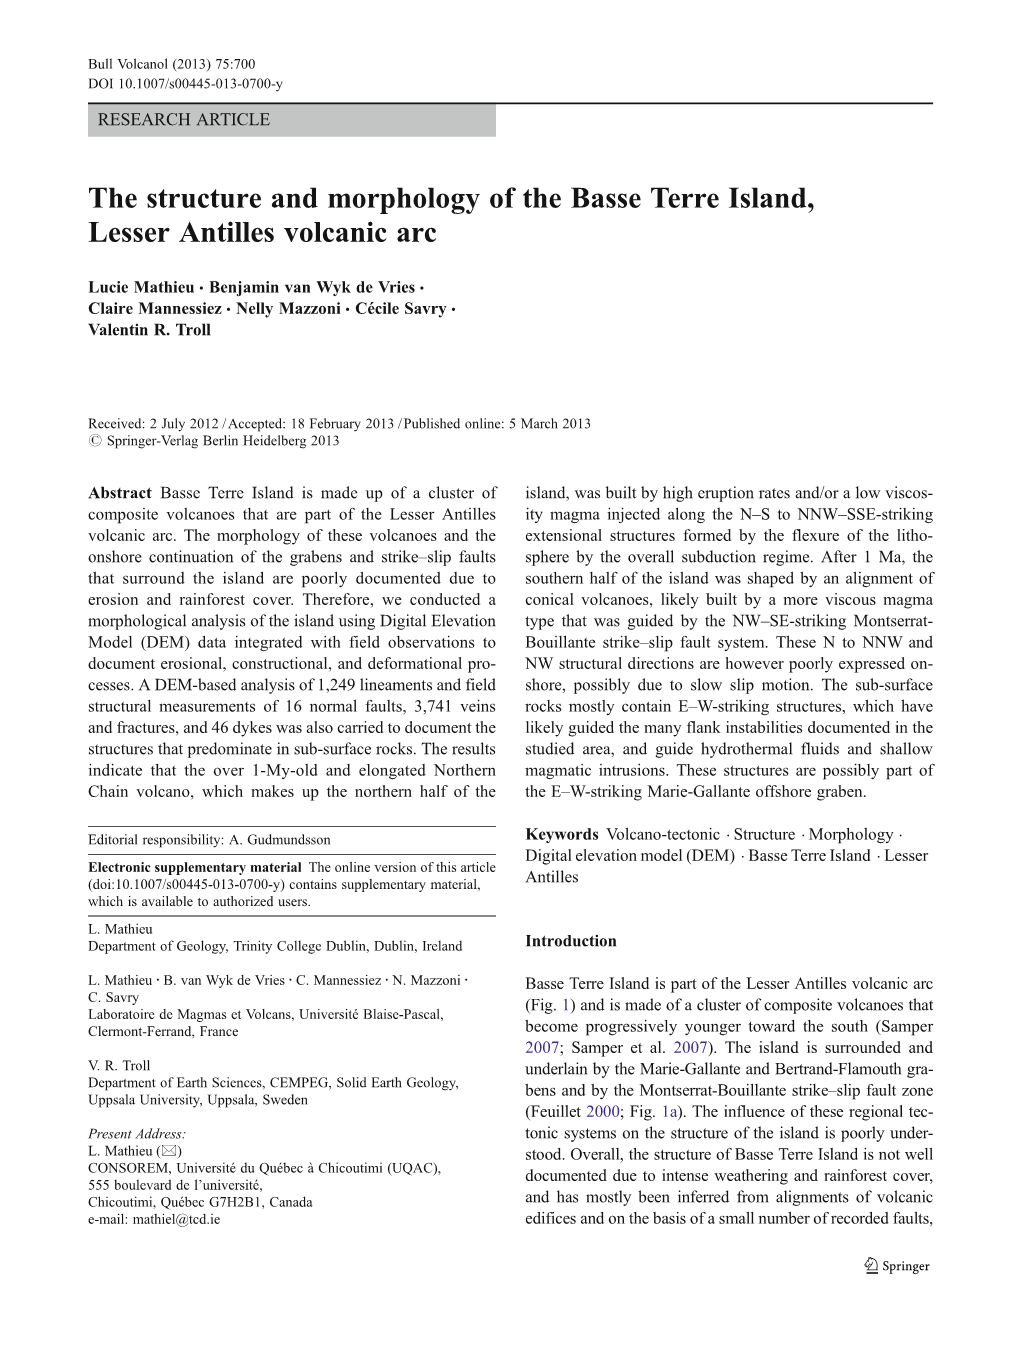 The Structure and Morphology of the Basse Terre Island, Lesser Antilles Volcanic Arc